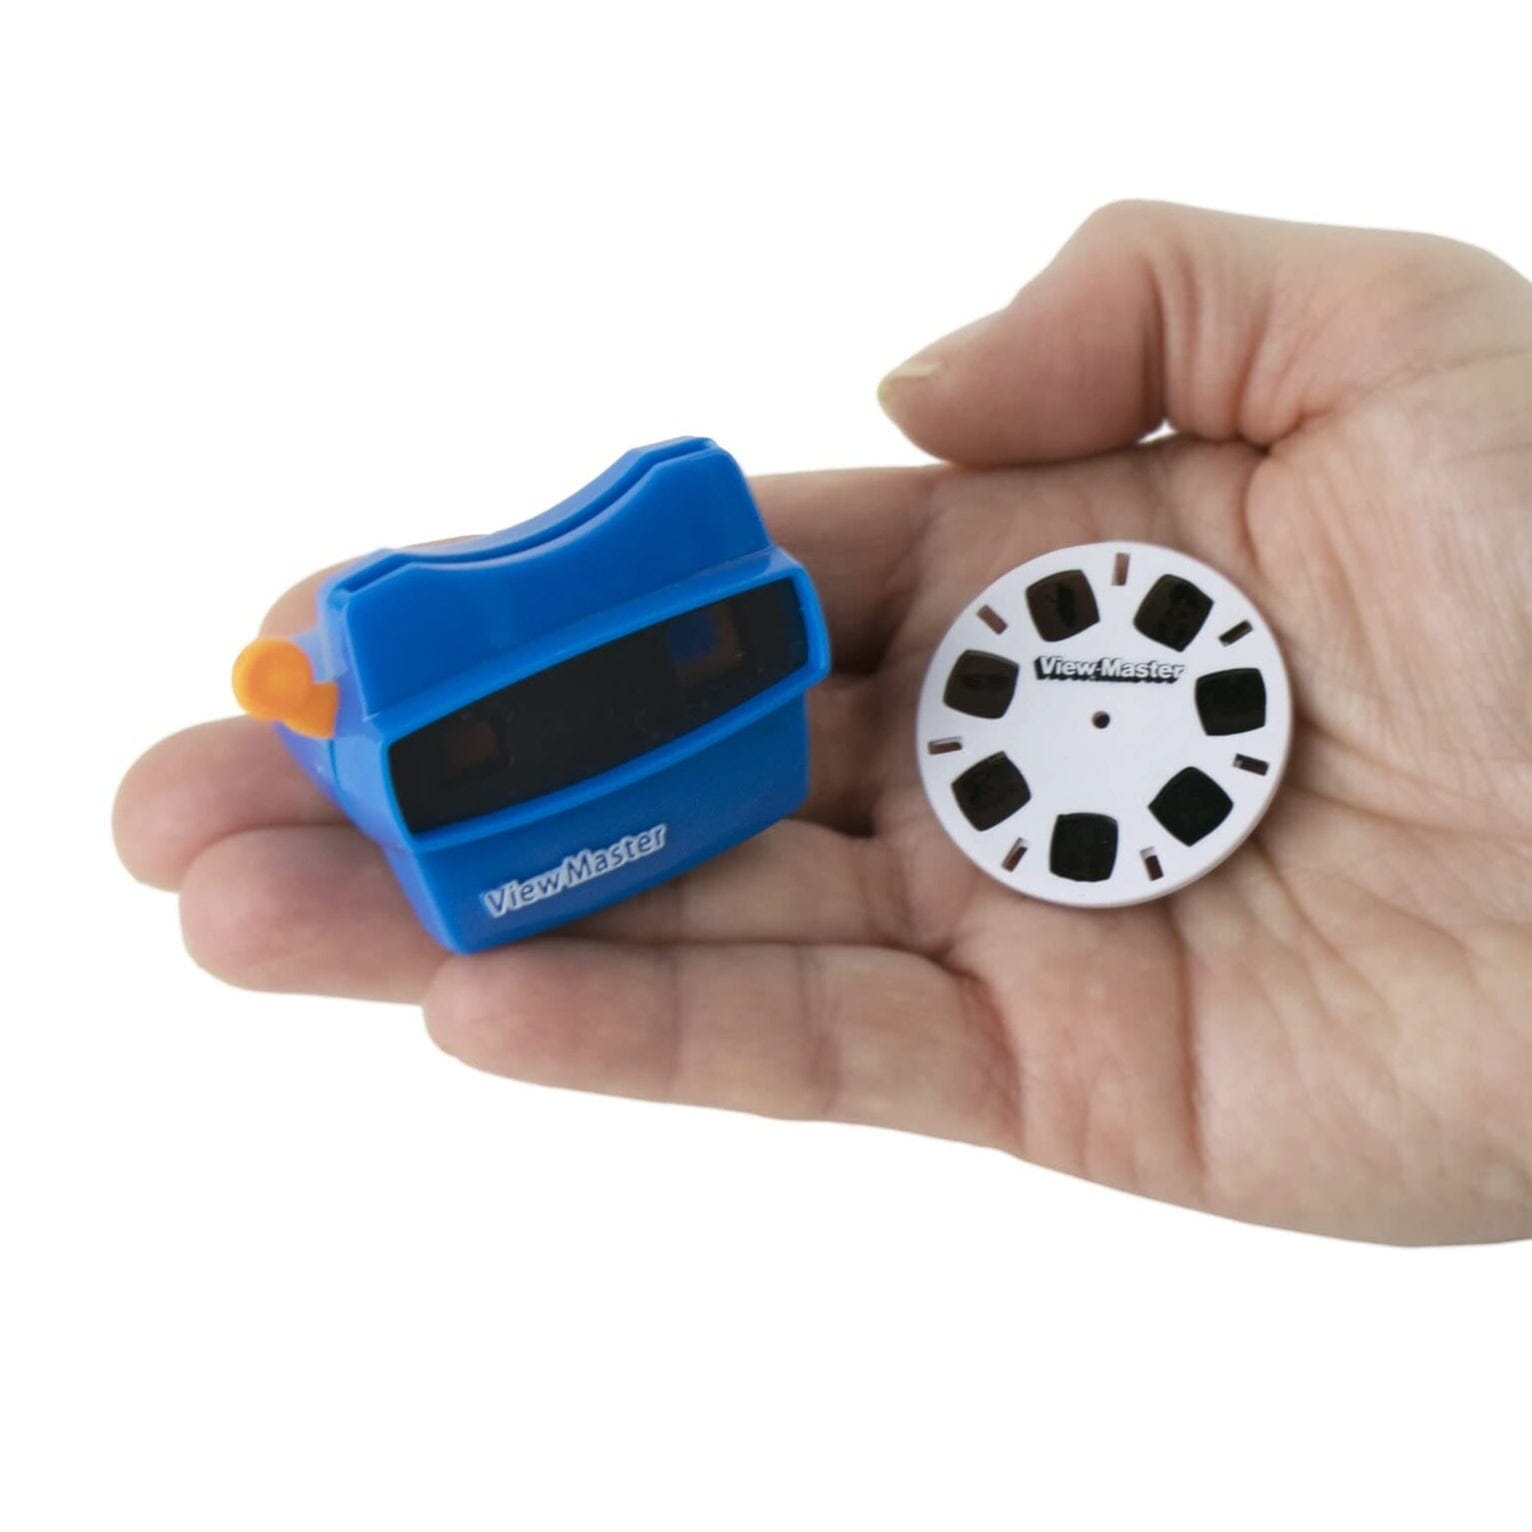 World's Smallest Viewmaster, Hot Wheels